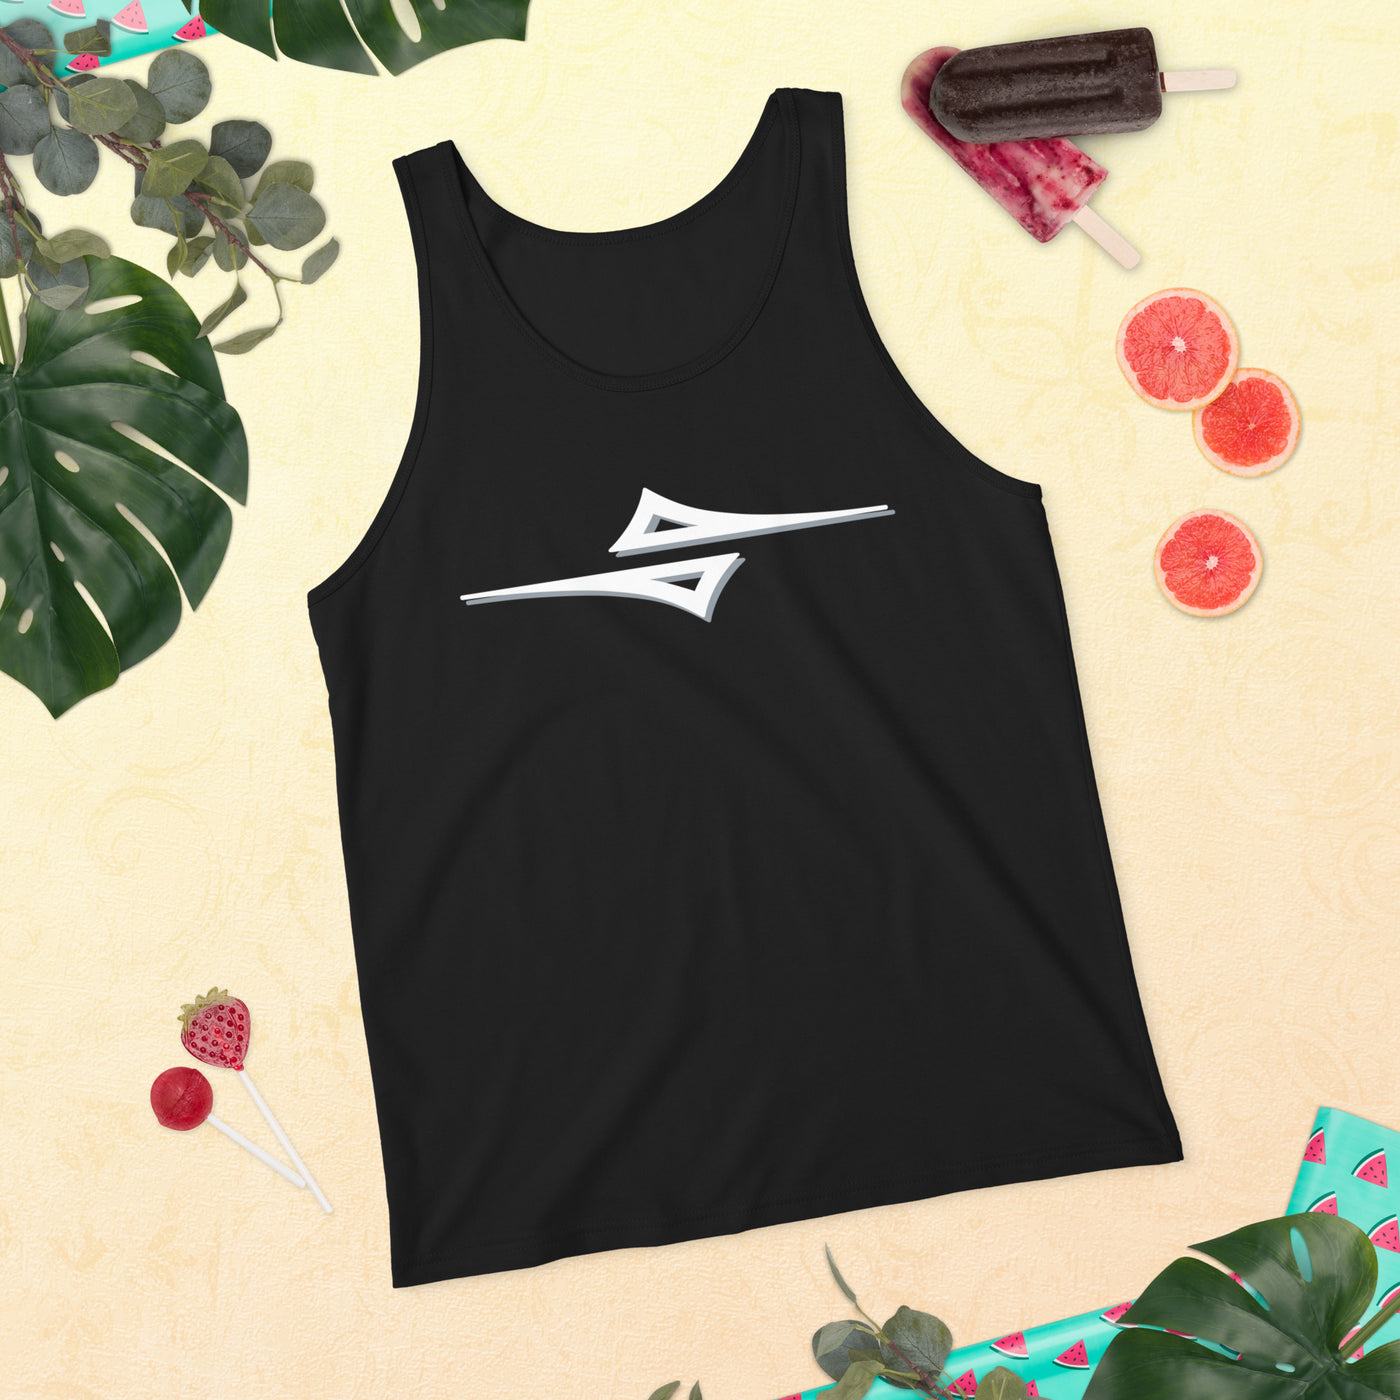 4iCe Icon Tank Top - 4iCe™ Official